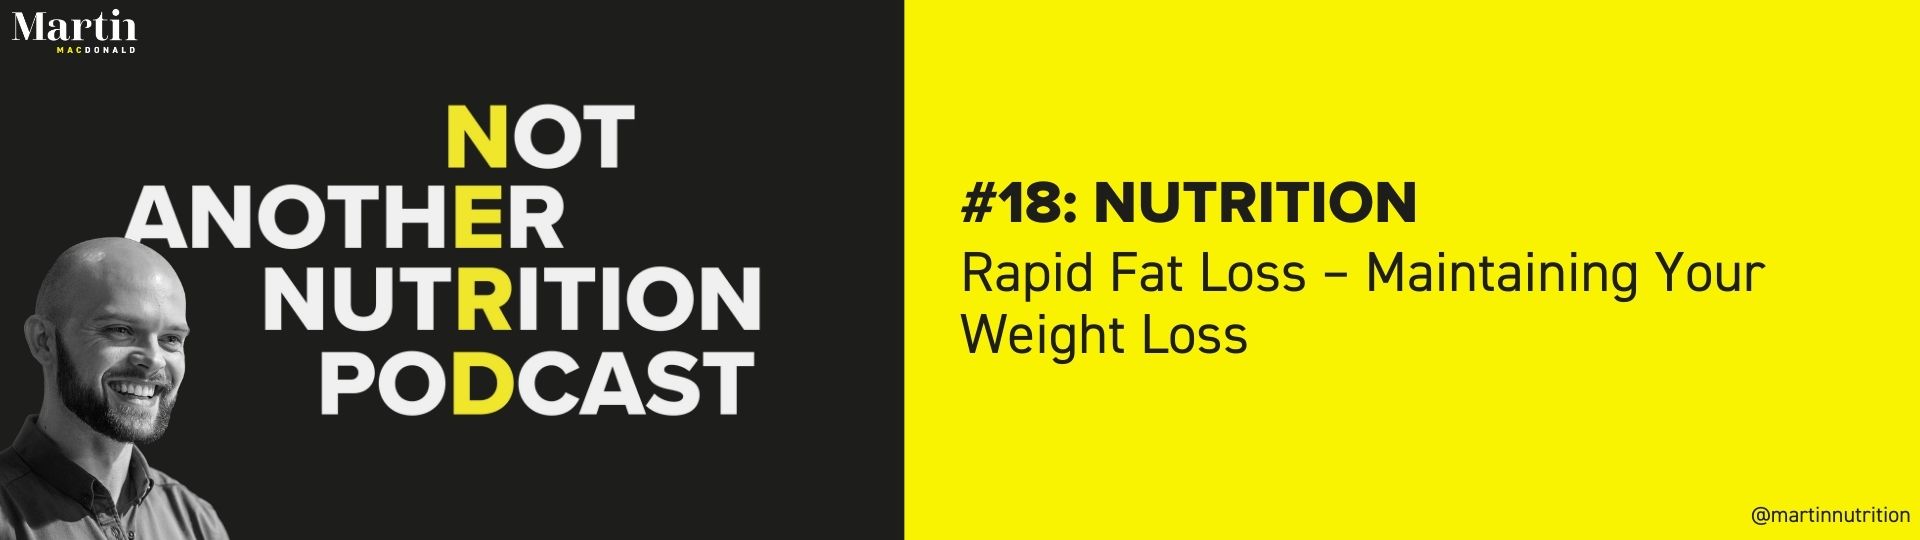 Rapid Fat Loss - Maintaining Your Weight Loss